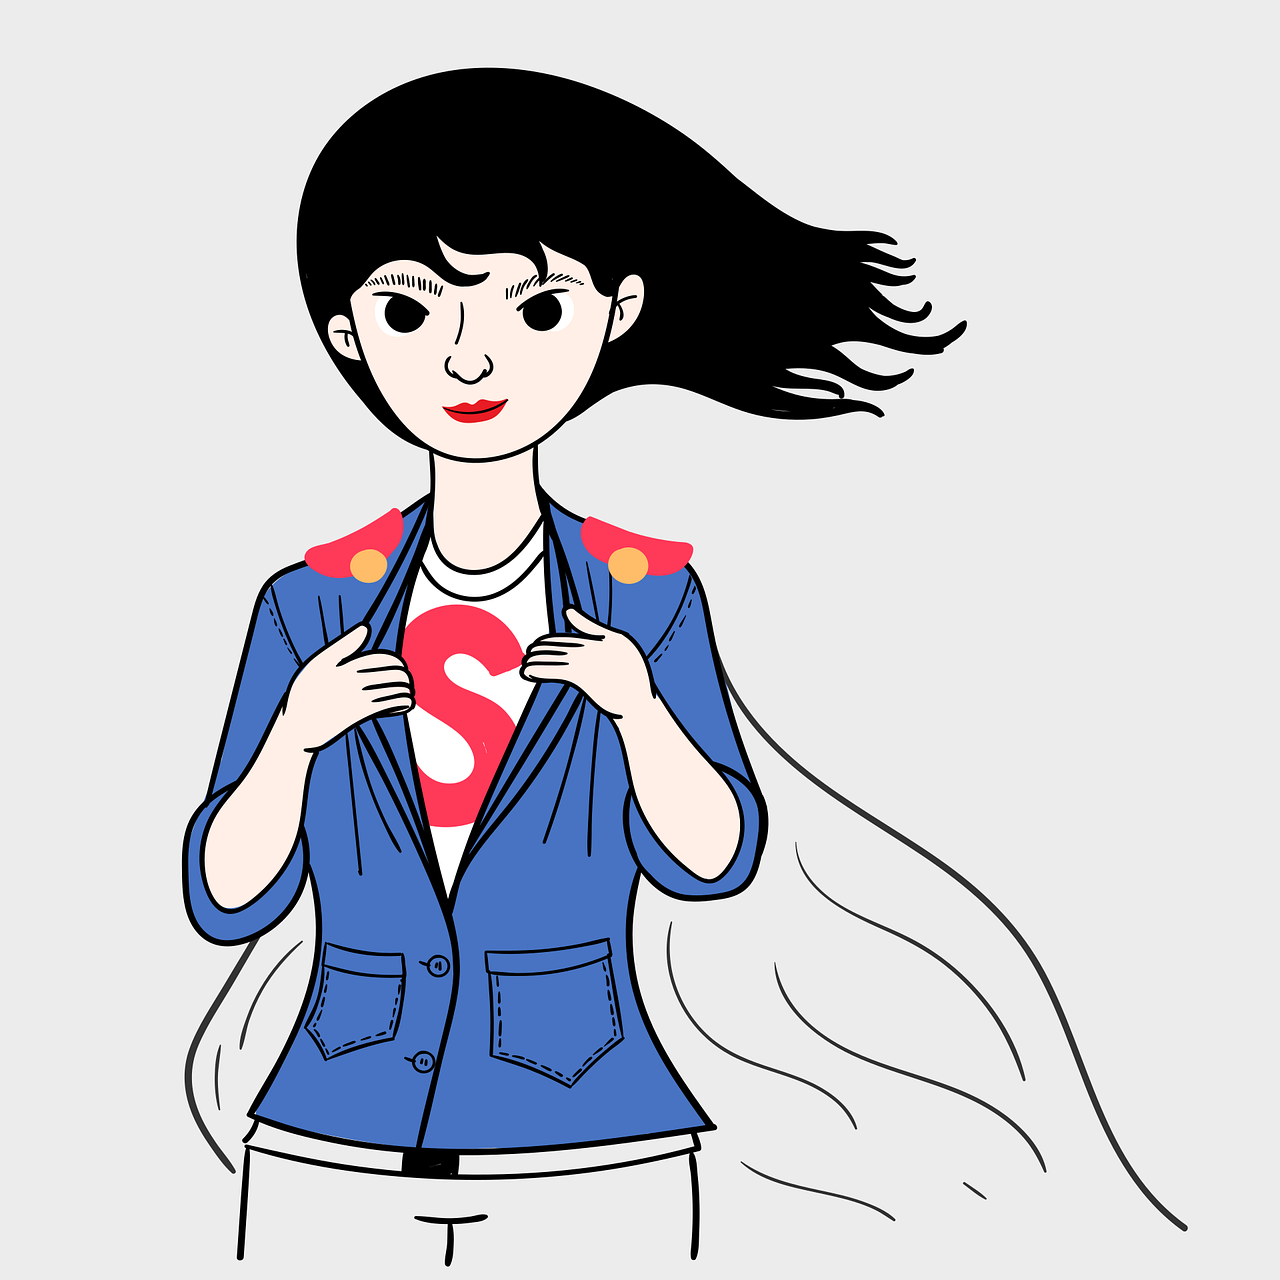 An illustration of a woman with a cape undoing her jacket to reveal an "S"